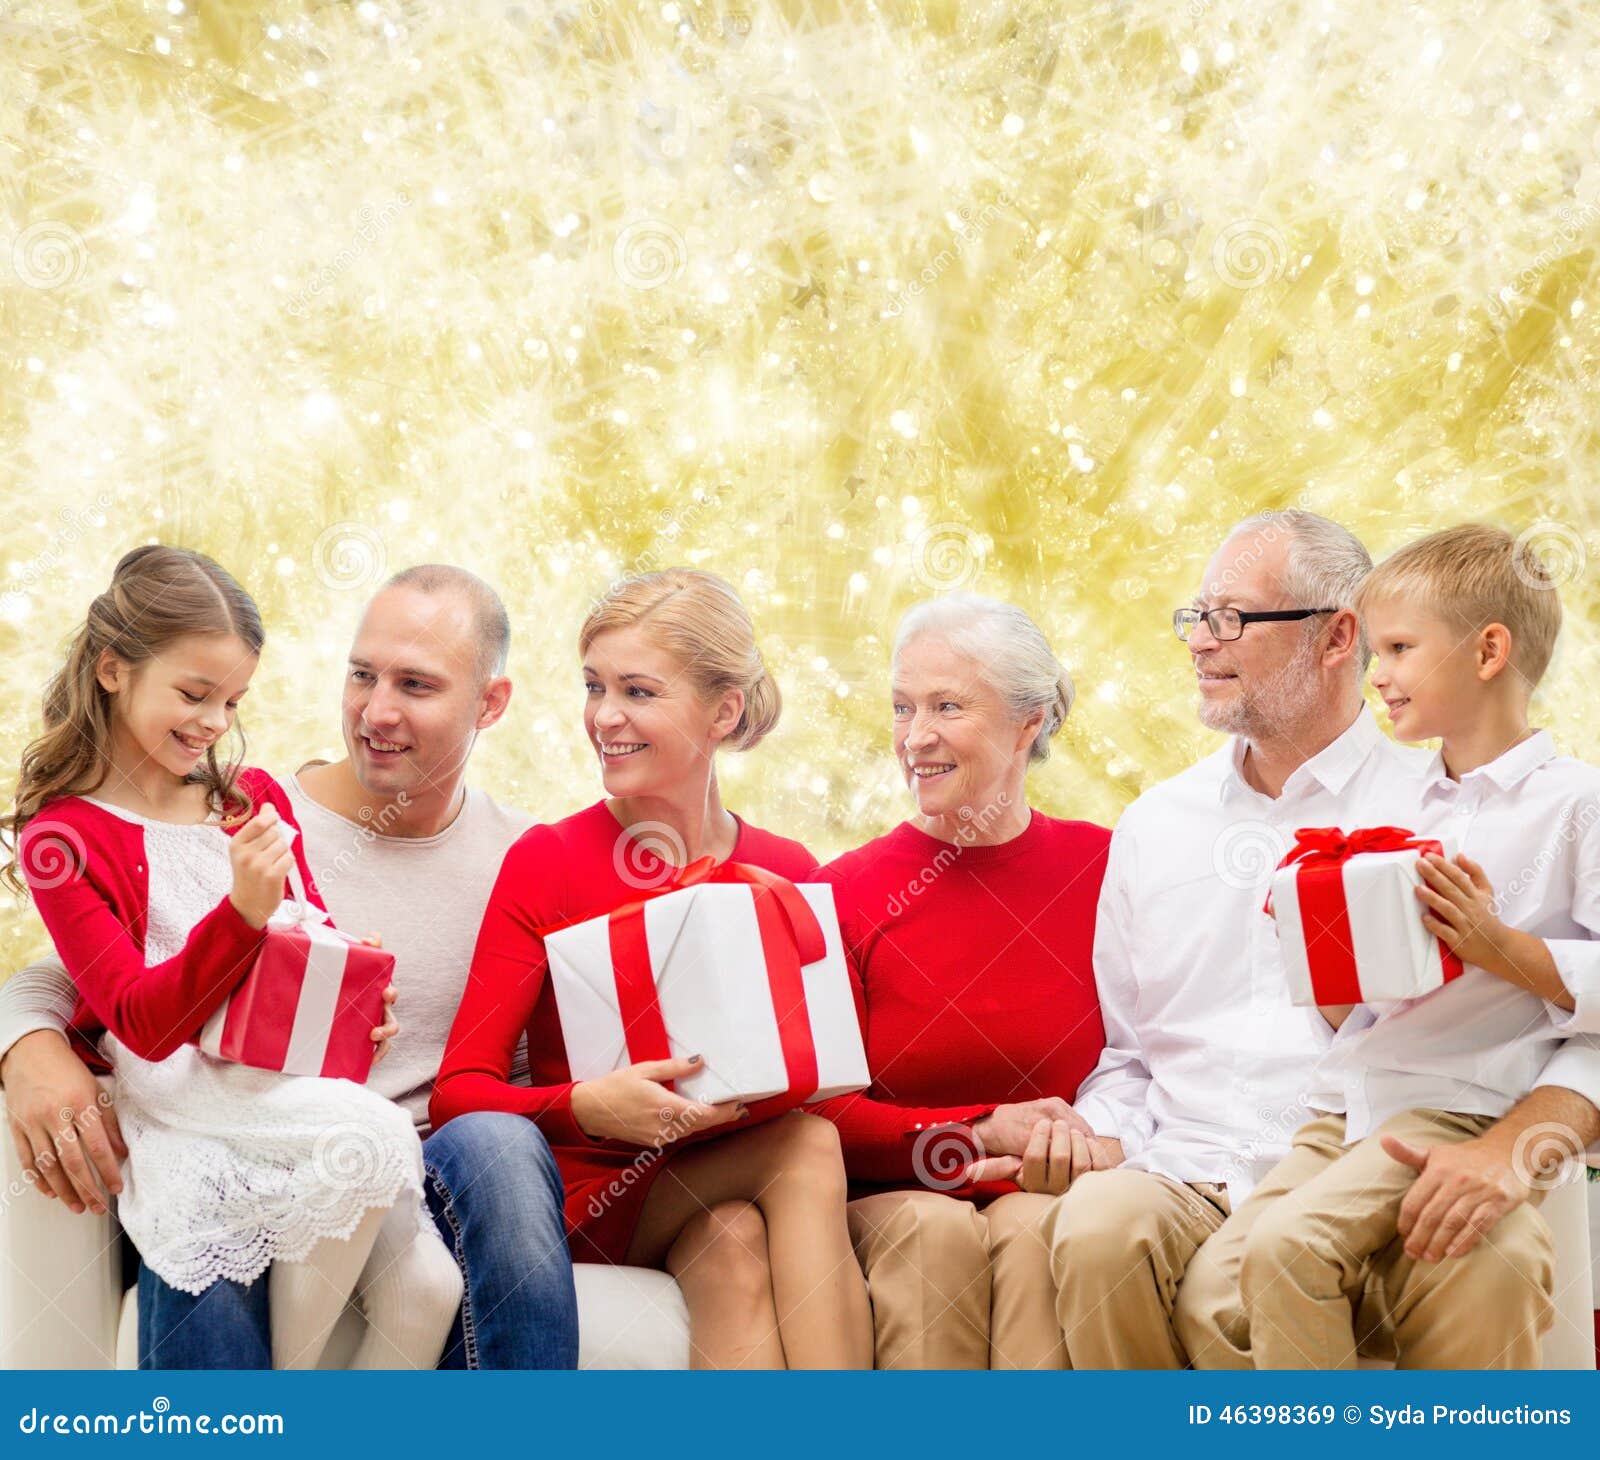 Smiling family with gifts stock image. Image of golden - 46398369